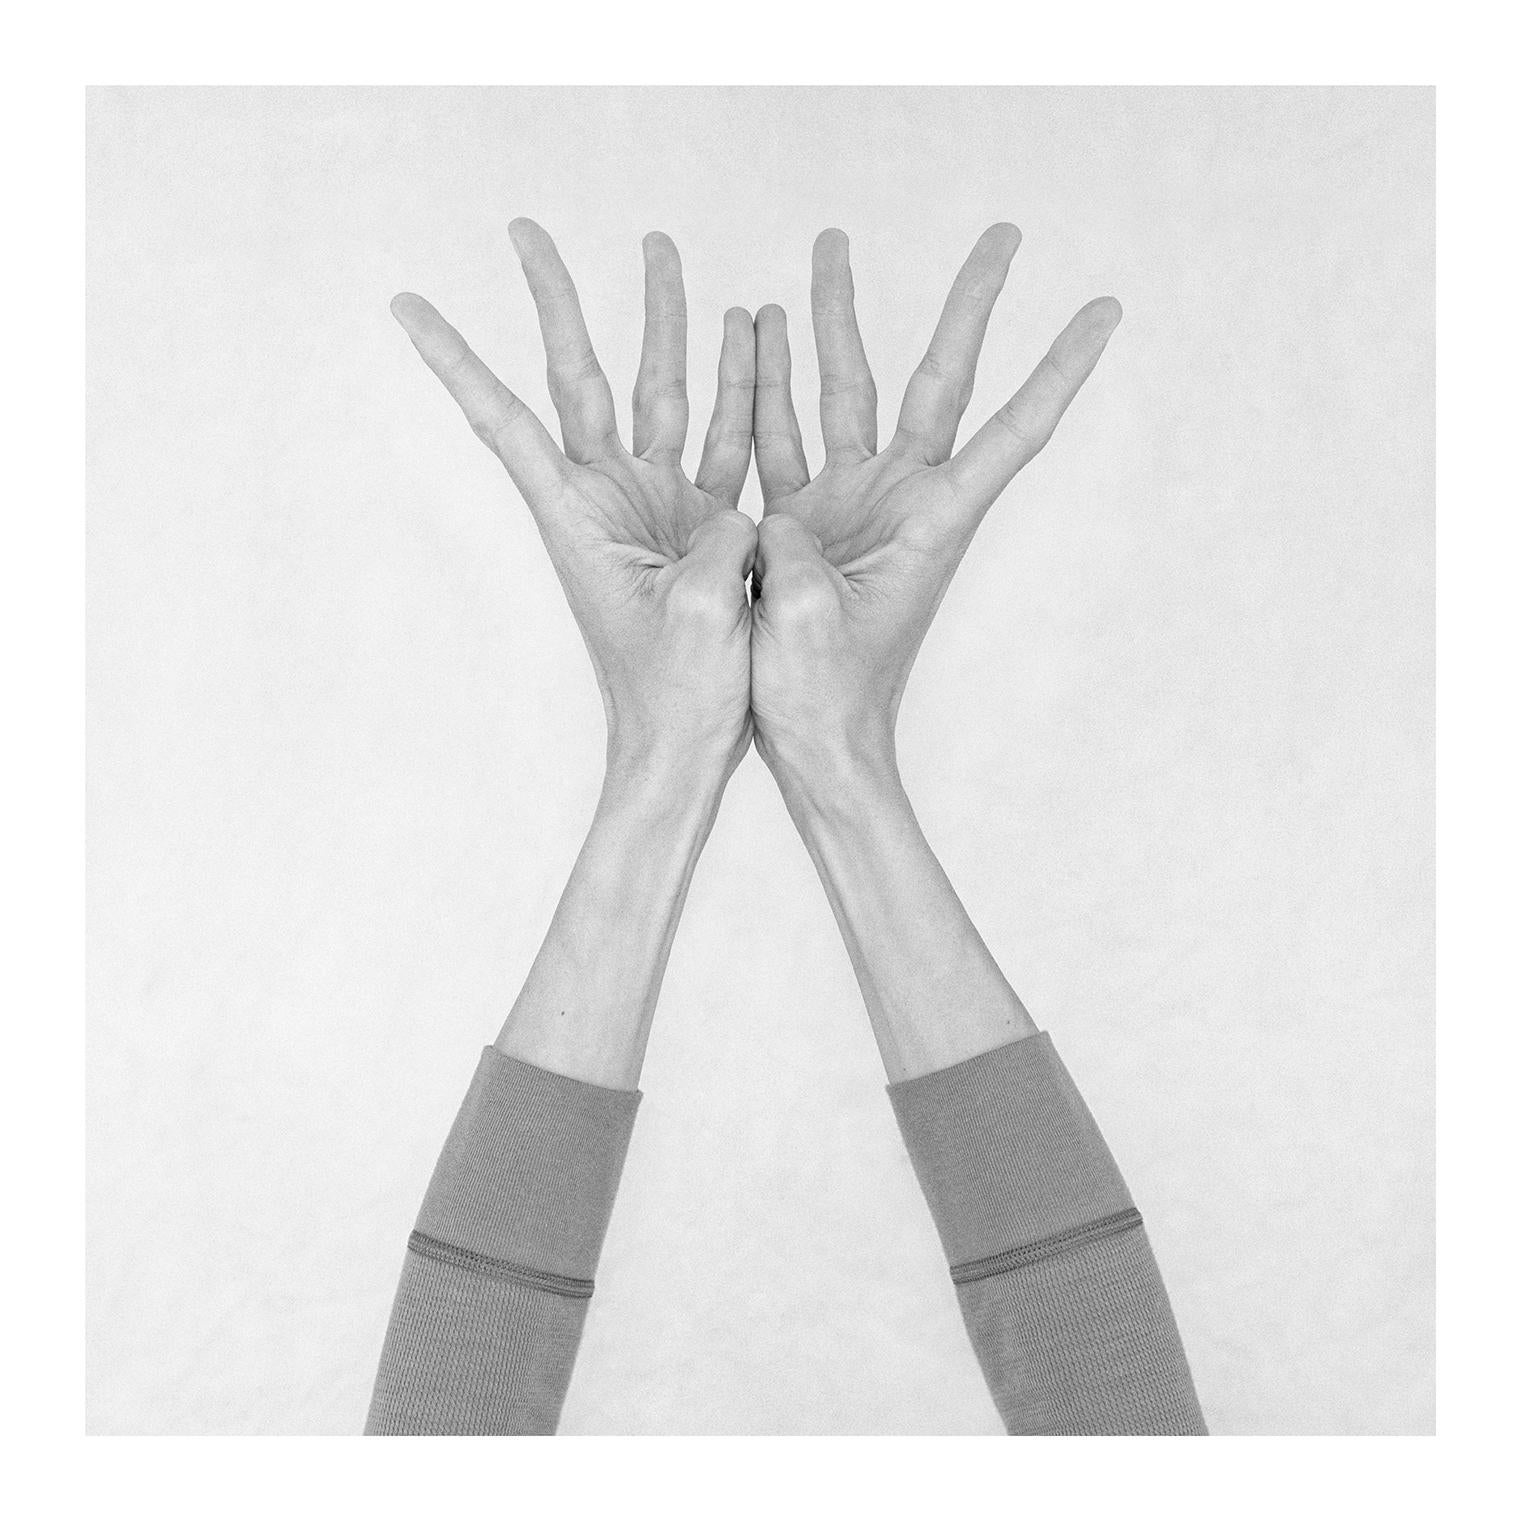 Nico Baixas / Gos-com-fuig Figurative Photograph - Untitled XVIII. From the Series Chiromorphose. Hands. Black & White Photography